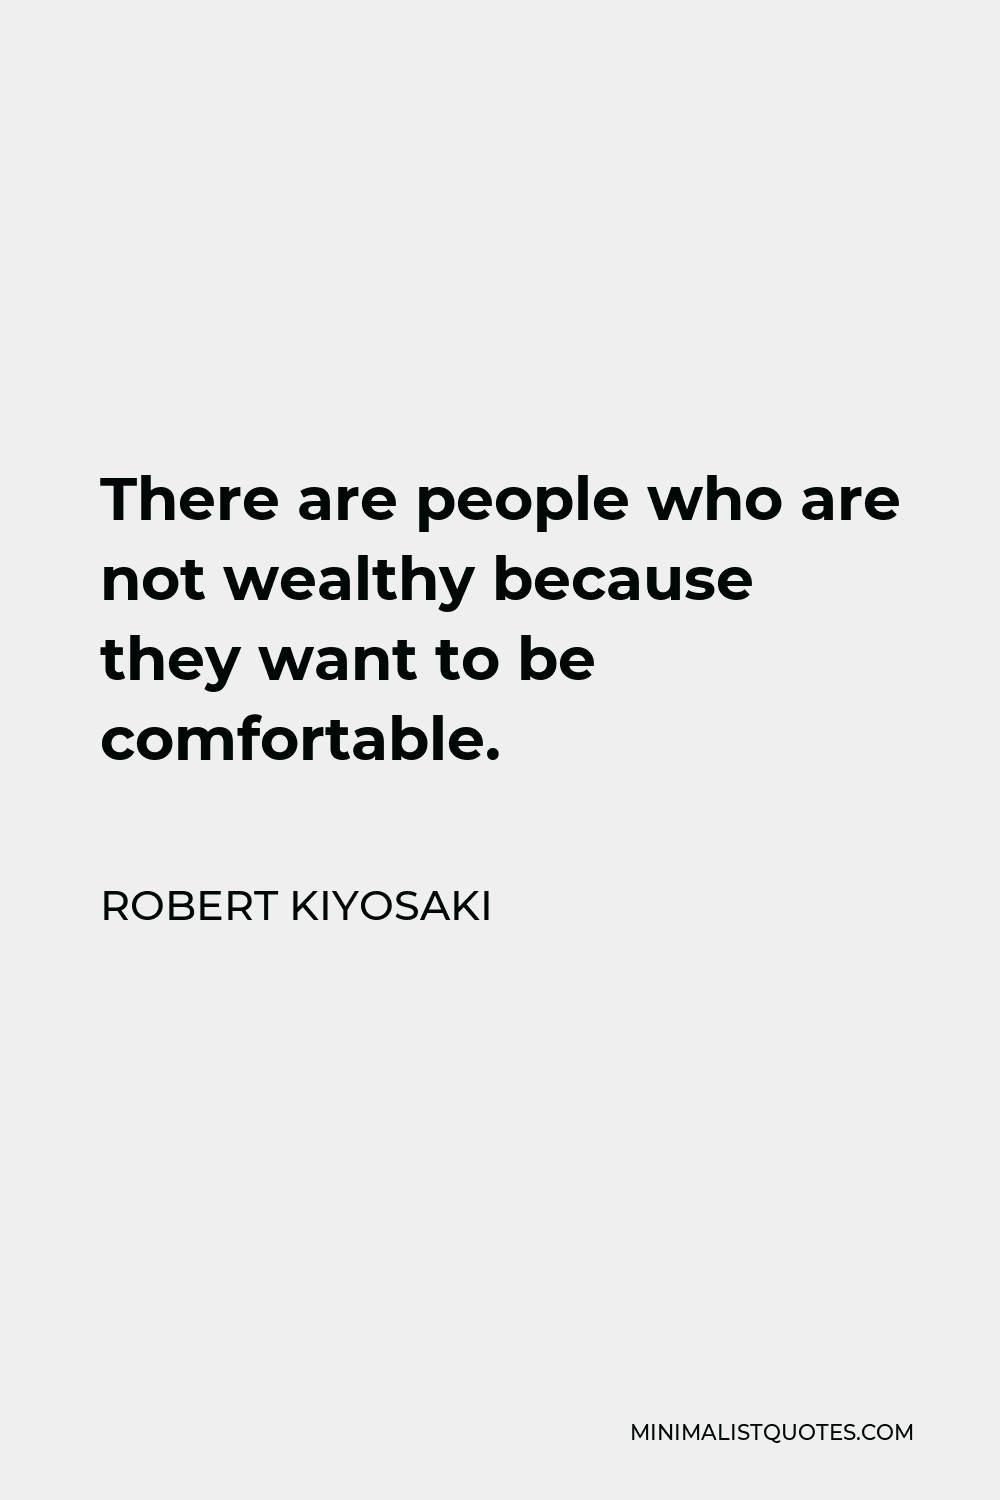 Robert Kiyosaki Quote - There are people who are not wealthy because they want to be comfortable.